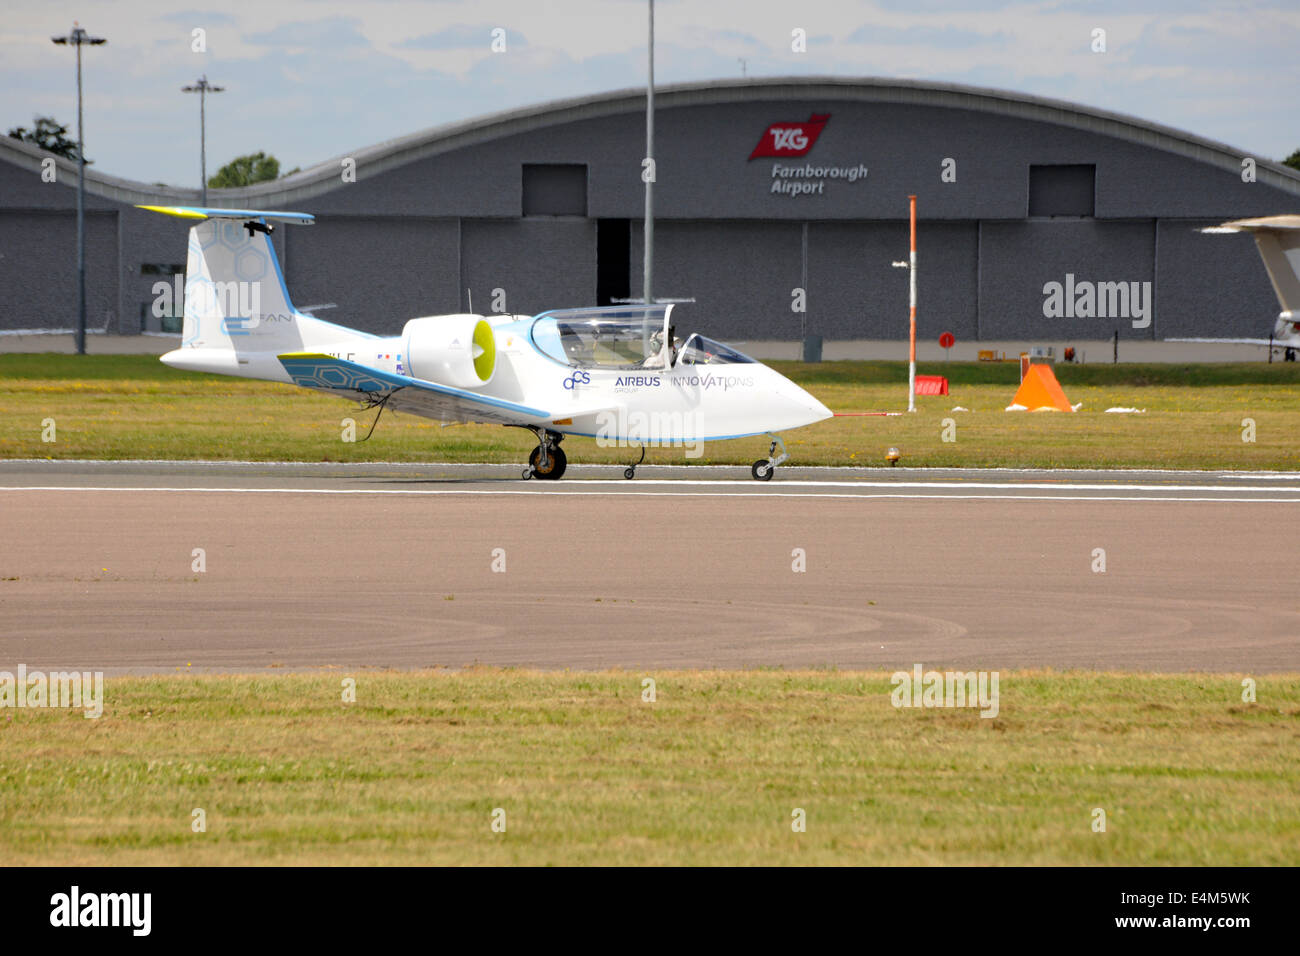 Farnborough, UK. 14th July, 2014. The Airbus E-Fan prototype electric aircraft, being developed by Airbus Group, taxiing at Farnborough International Air Show 14th July 2014 Credit:  Martin Brayley/Alamy Live News Stock Photo